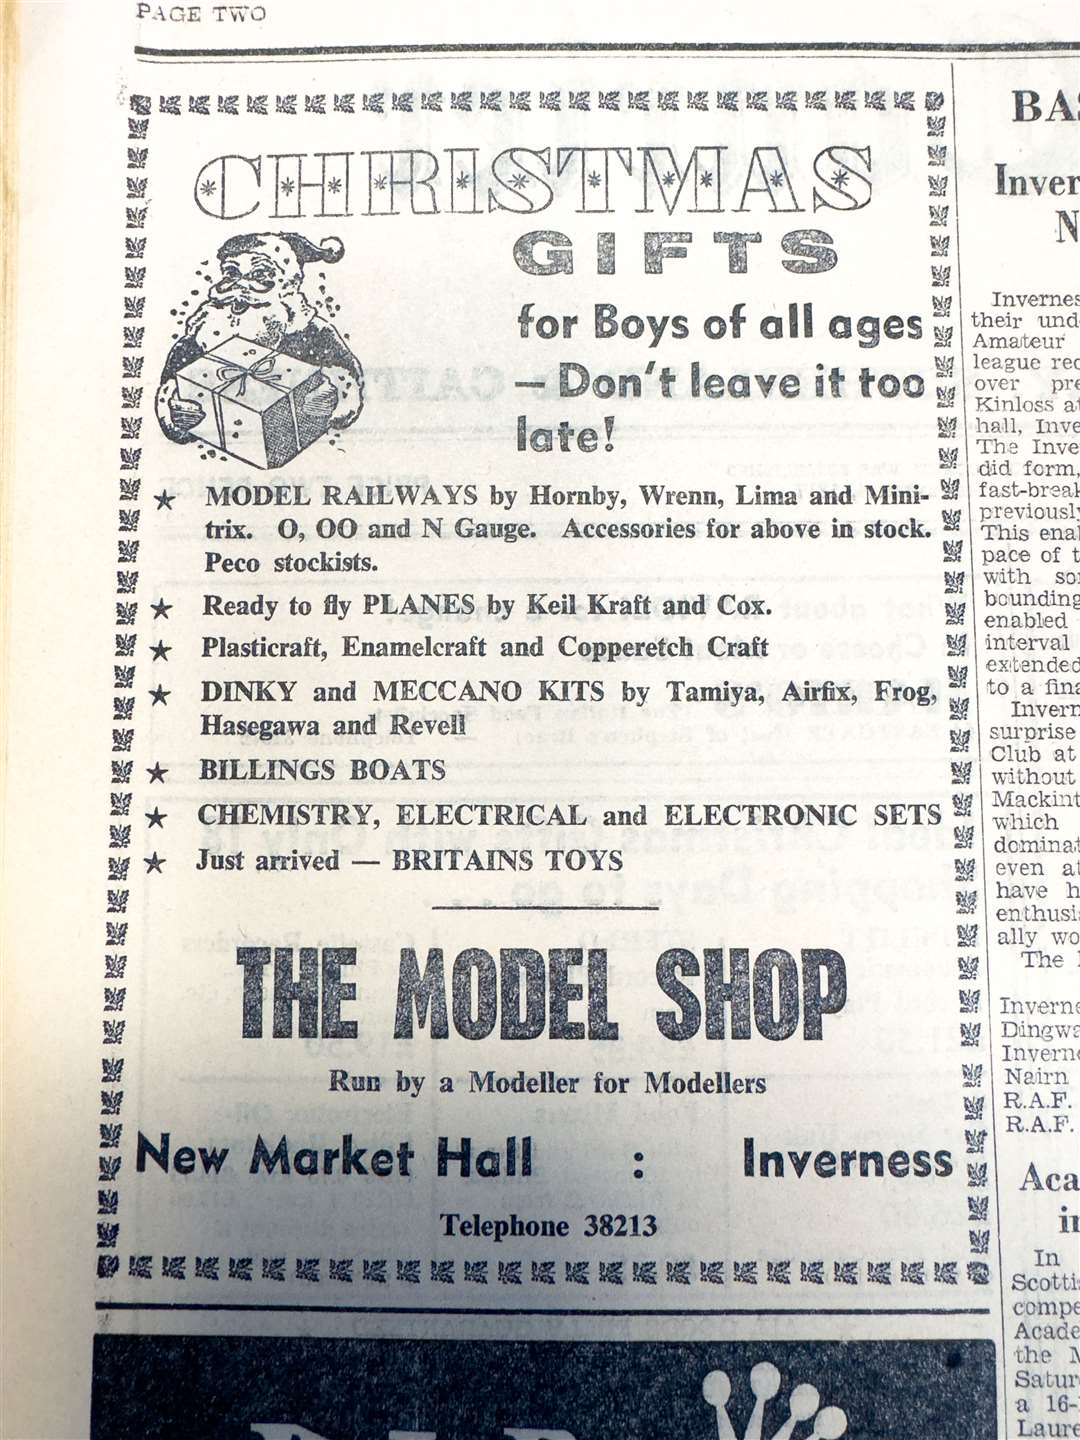 The Model Shop boasted gifts for boys of all ages.